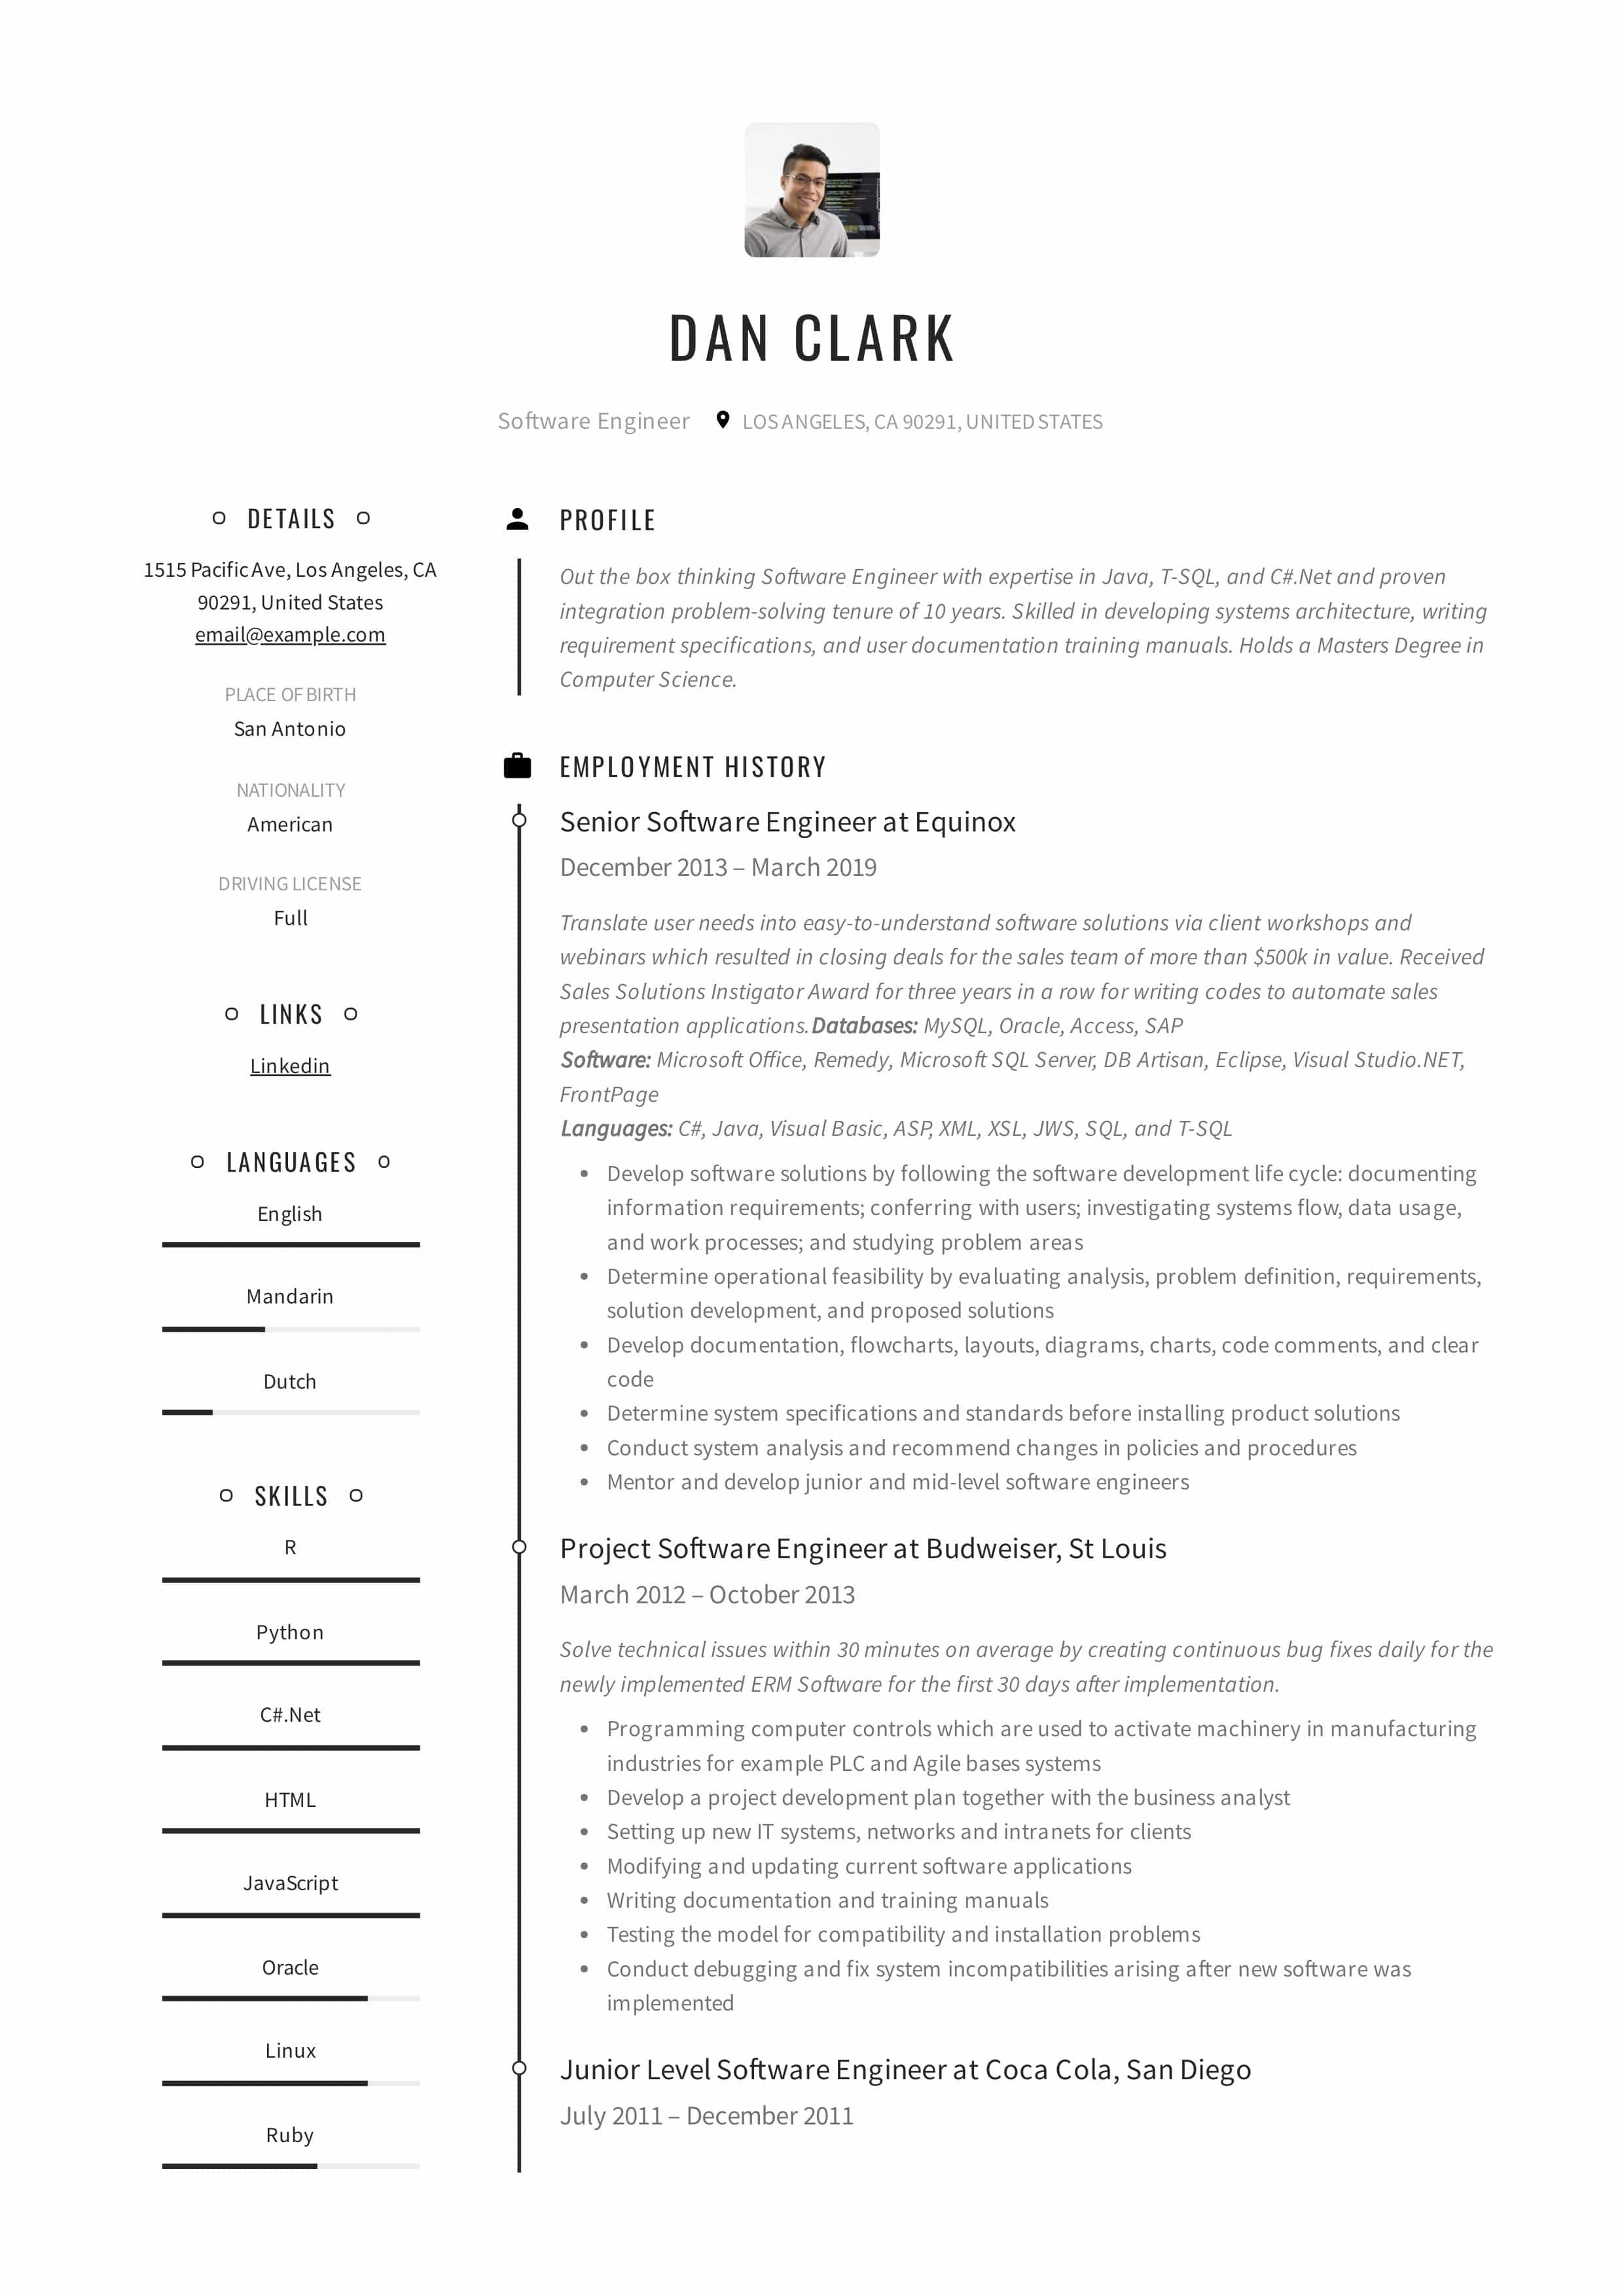 Resume Templates [2019] PDF and Word